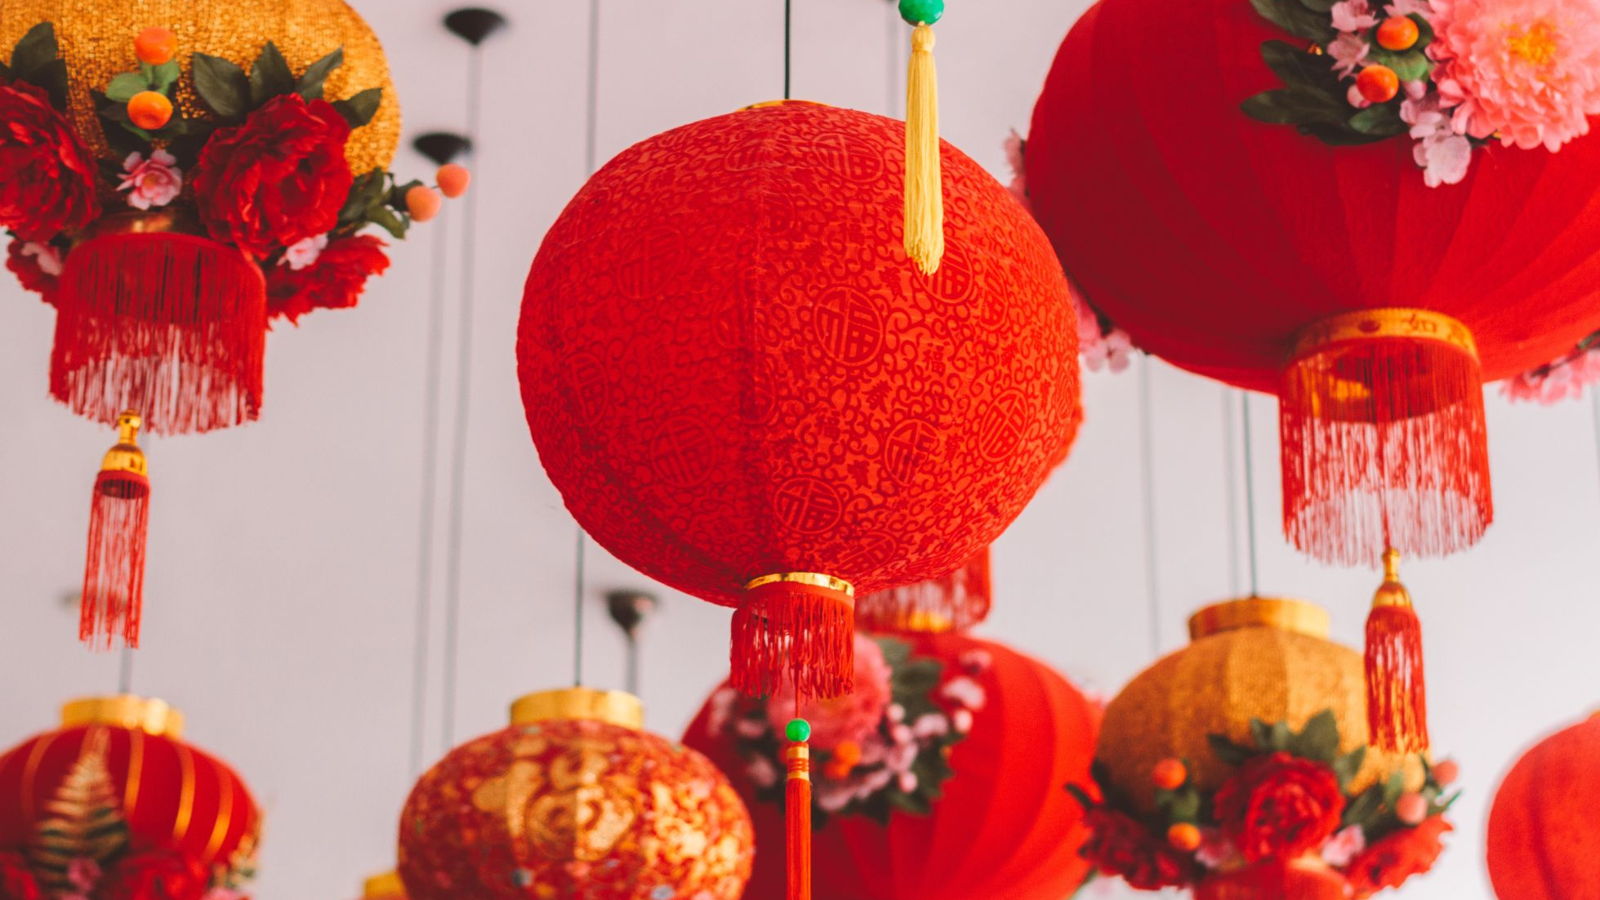 Ultimate Guide to Preparing Chinese New Year Dinner